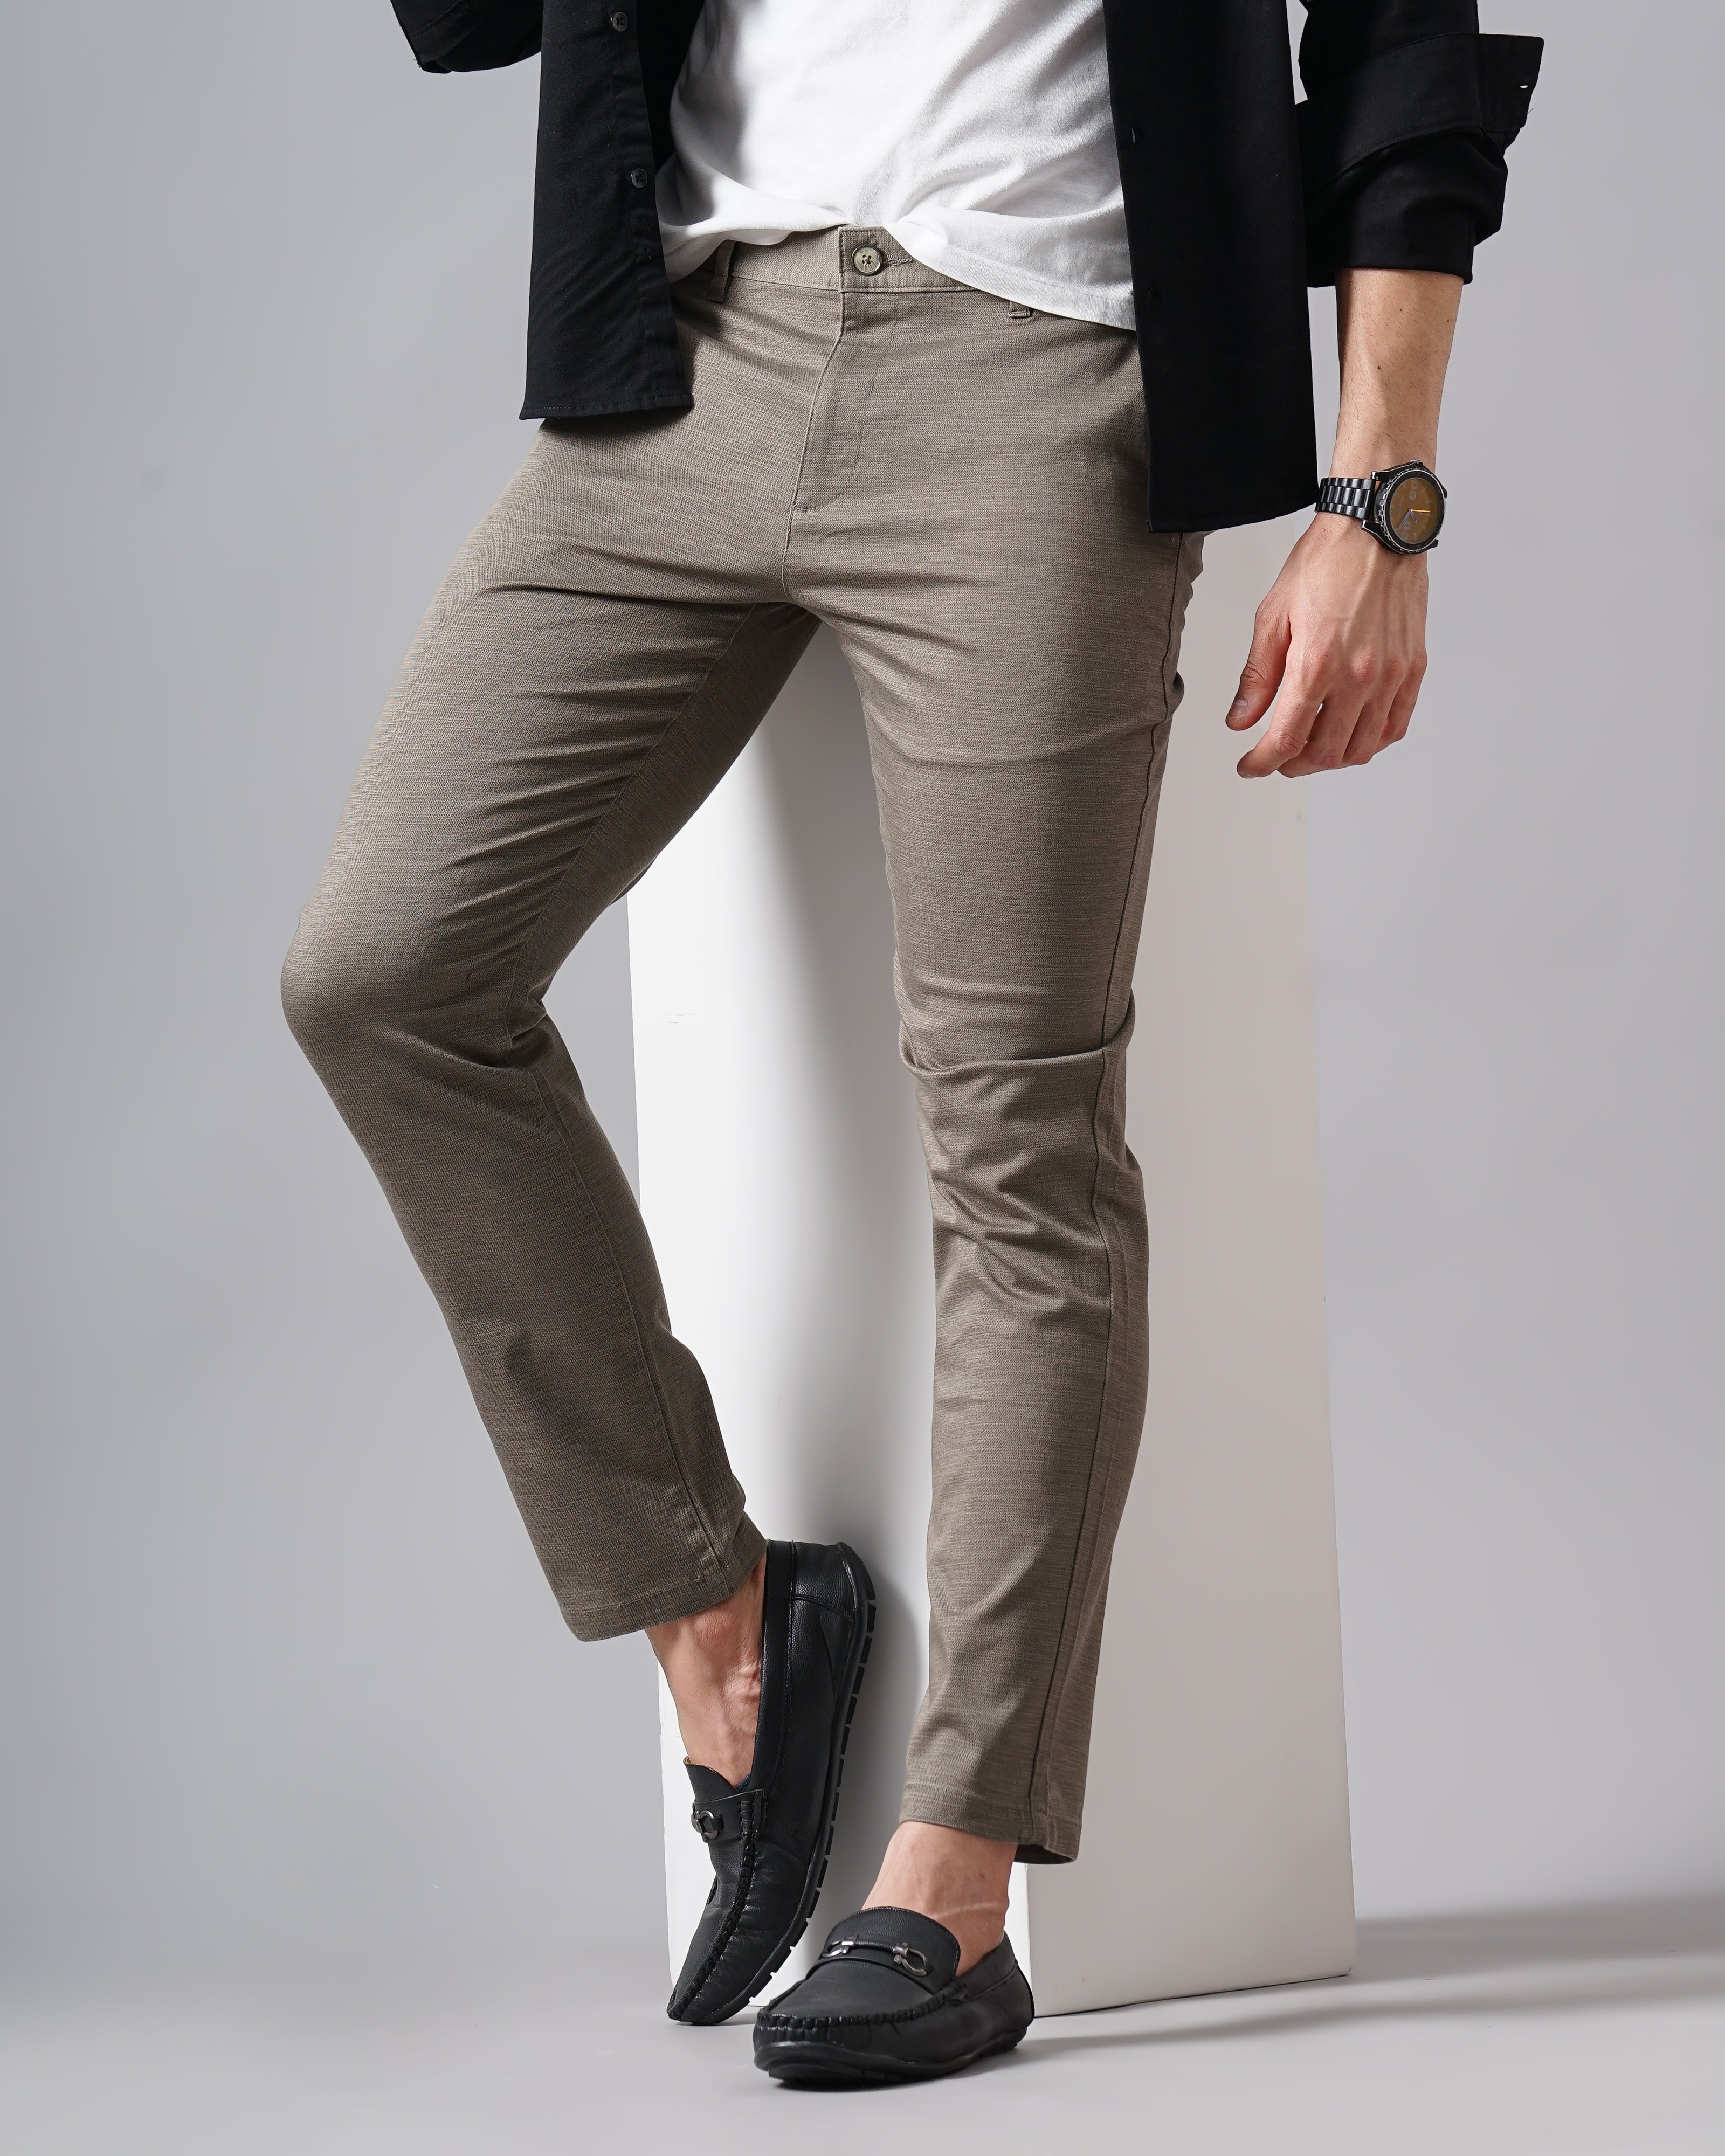 men's casual Chinos